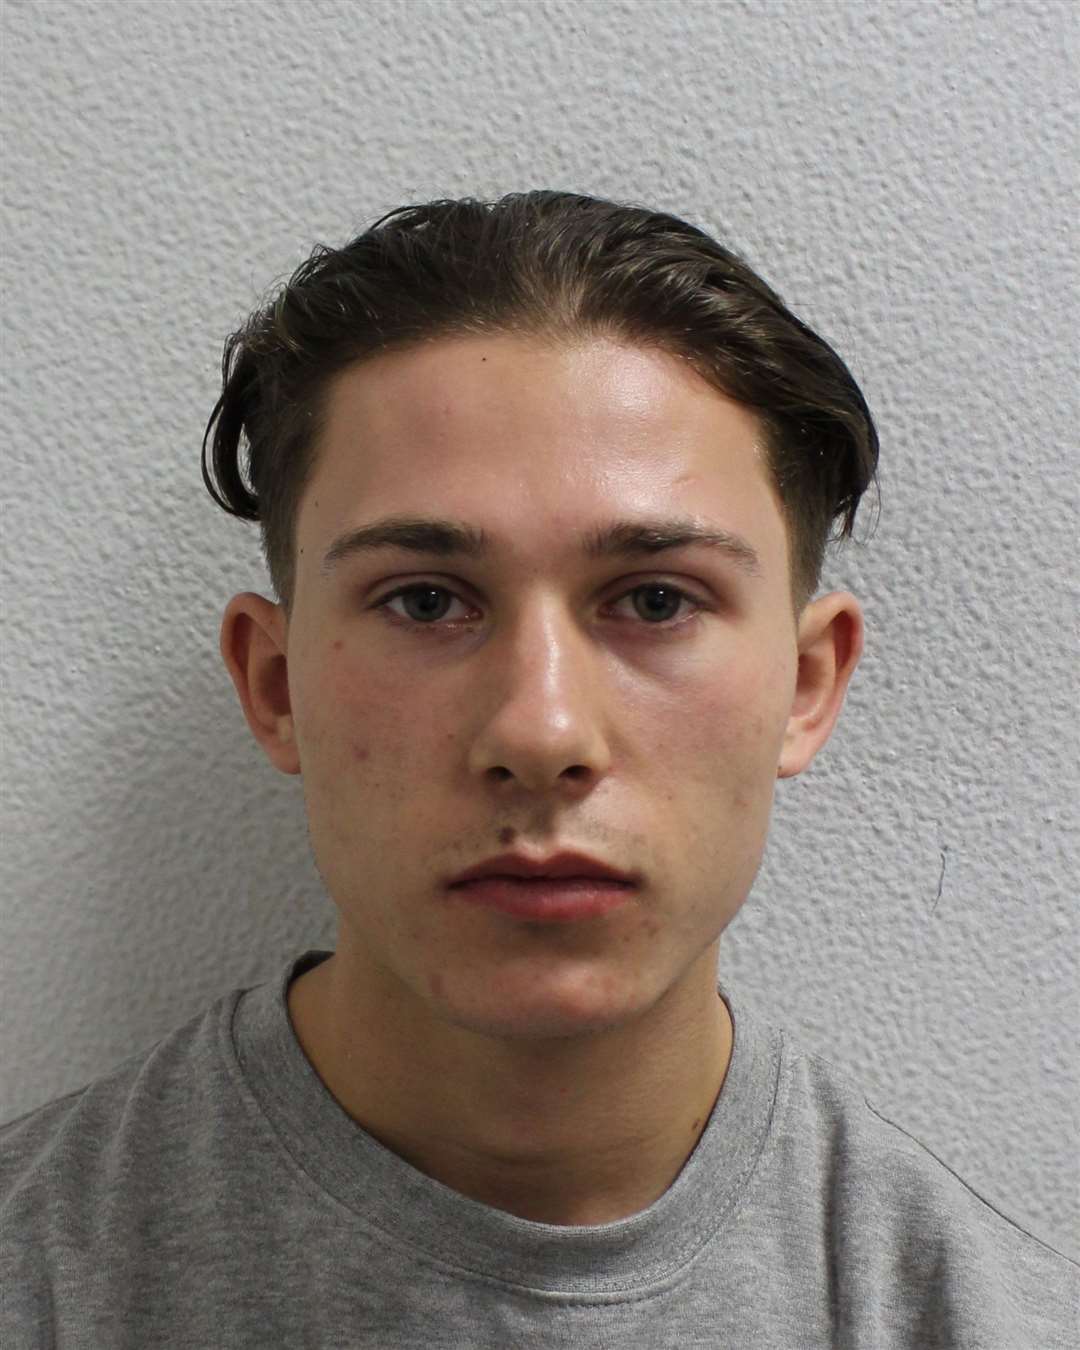 James Biscoe, from Dartford, was jailed for death by dangerous driving. Picture: Metropolitan Police